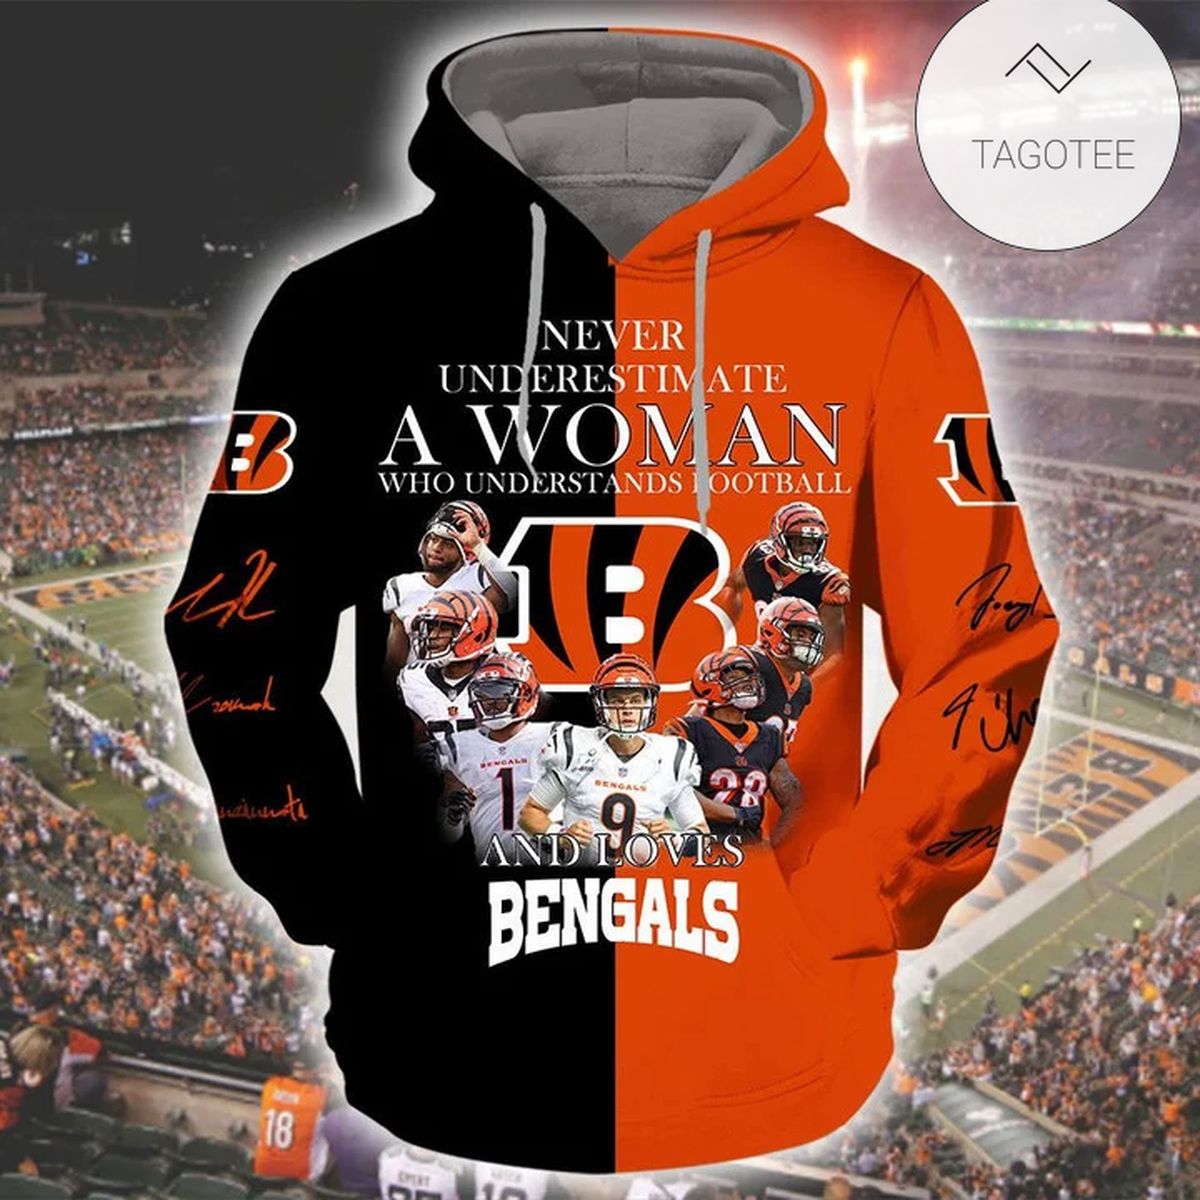 Never Underestimate A Woman Who Understands Football And Loves Bengals Hoodie